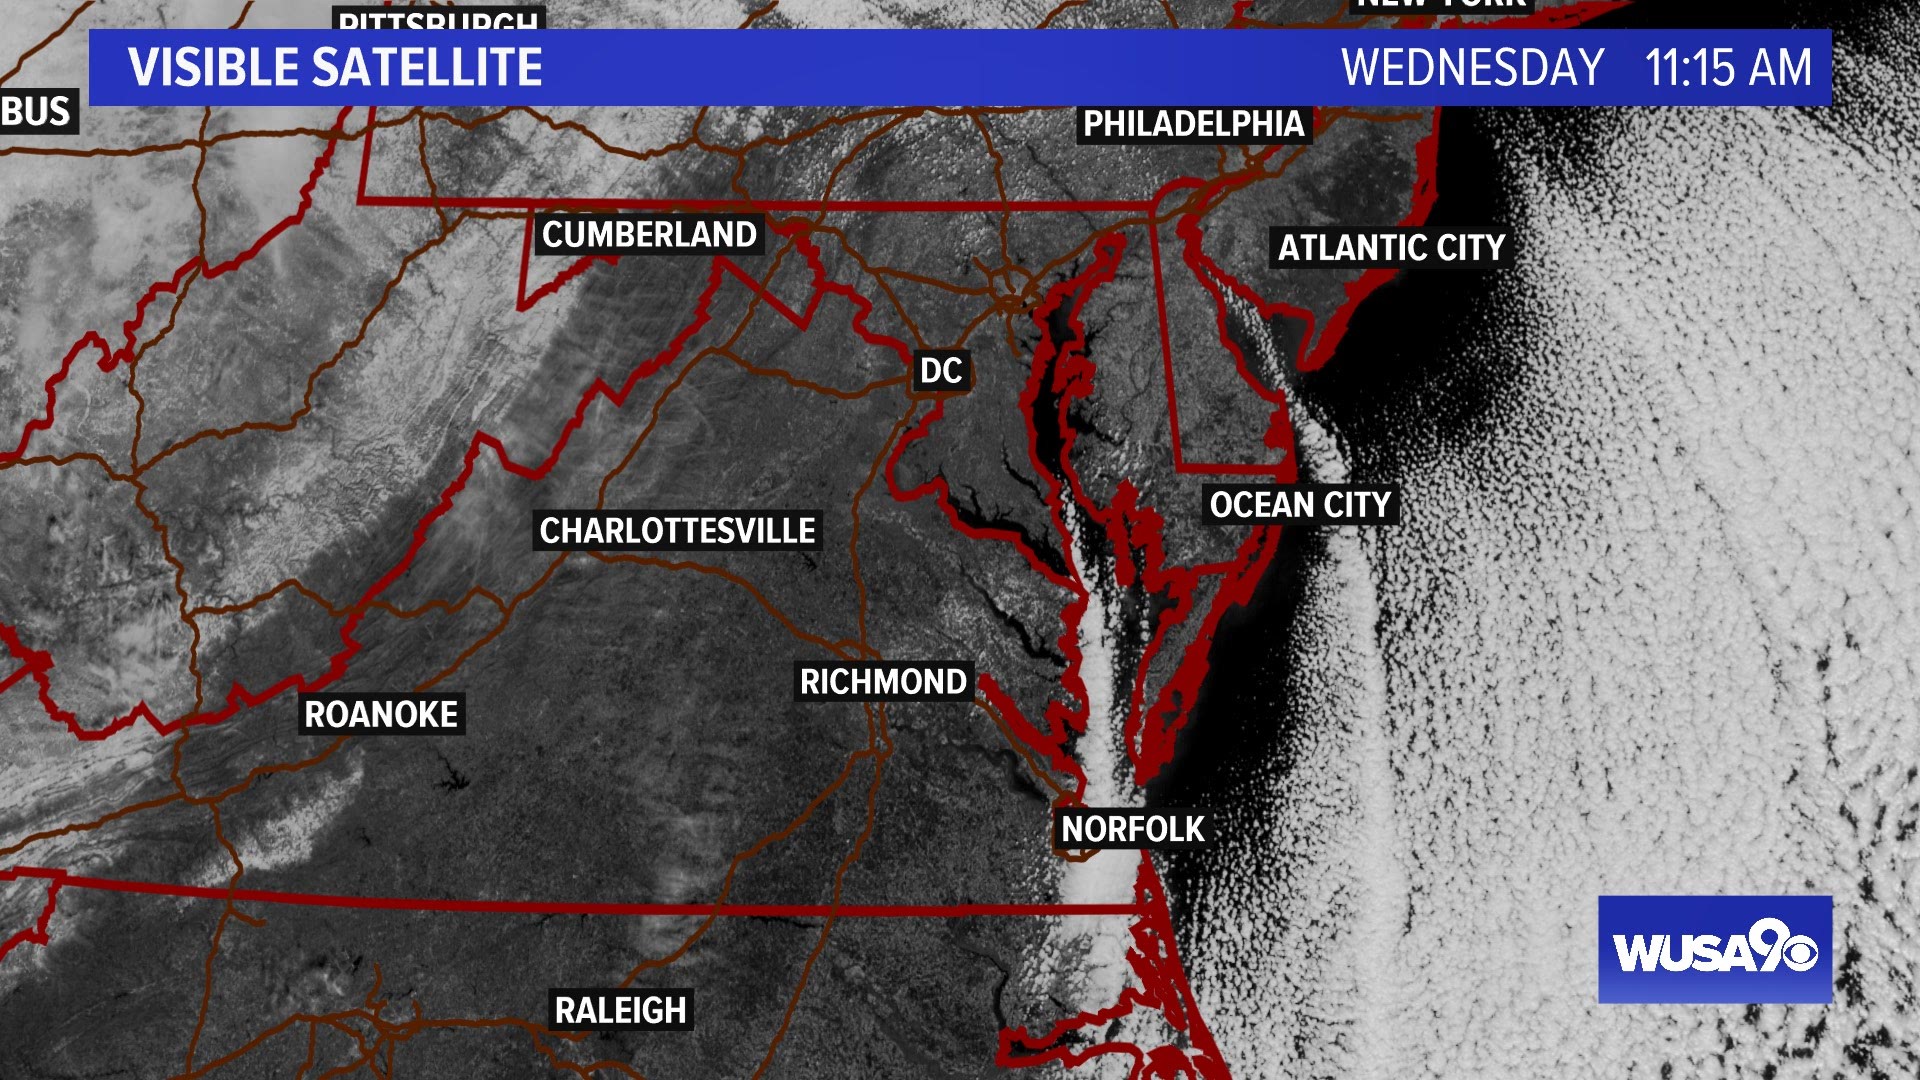 Visible satellite shows fresh snow and bay-effect clouds